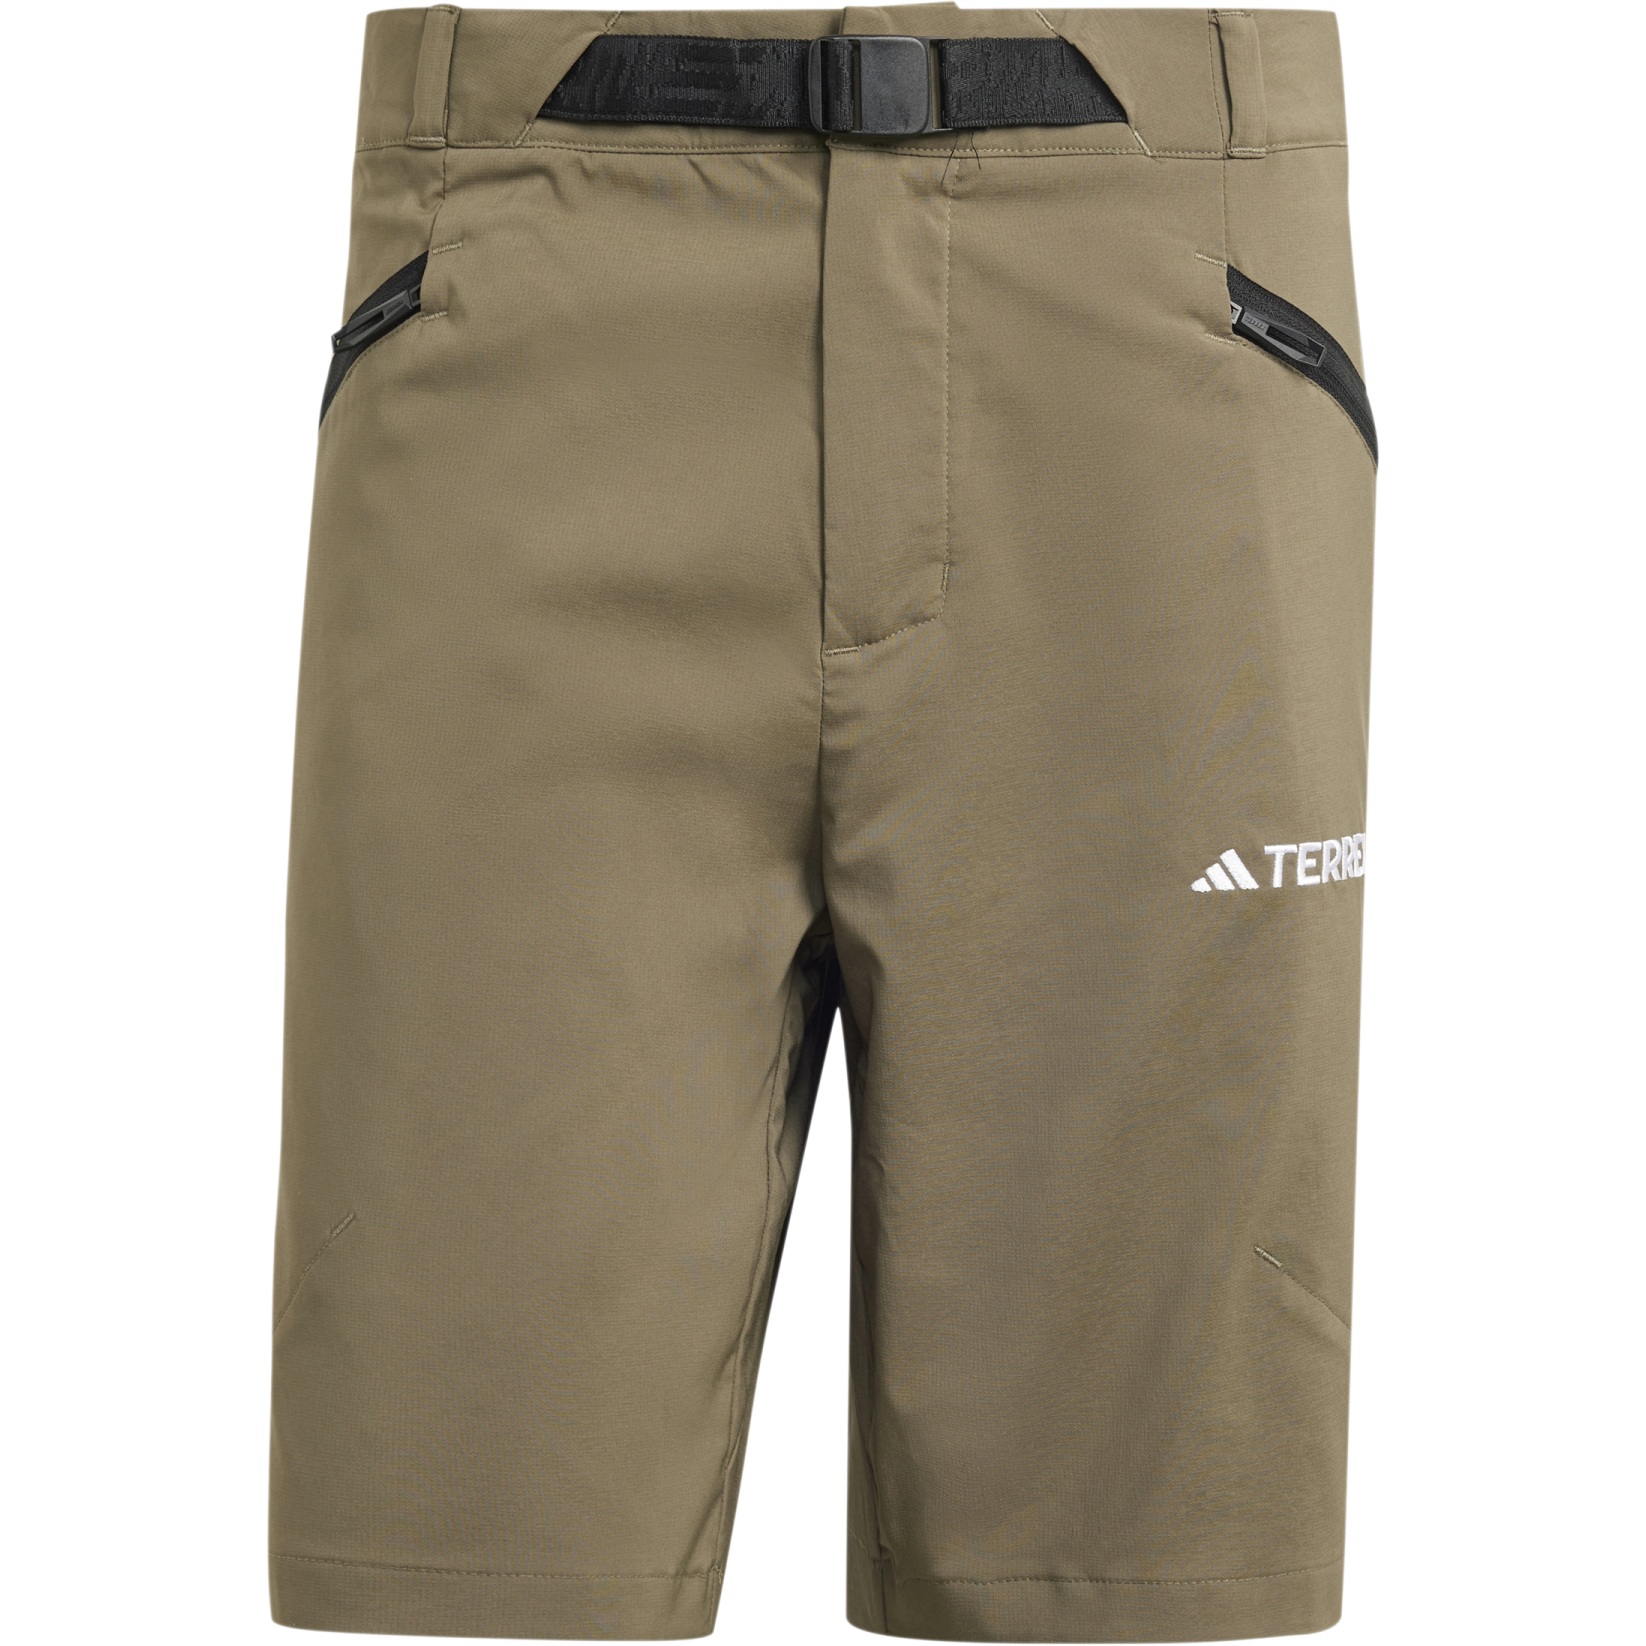 Picture of adidas TERREX Xperior Mid Shorts Men - olive strata IJ8303